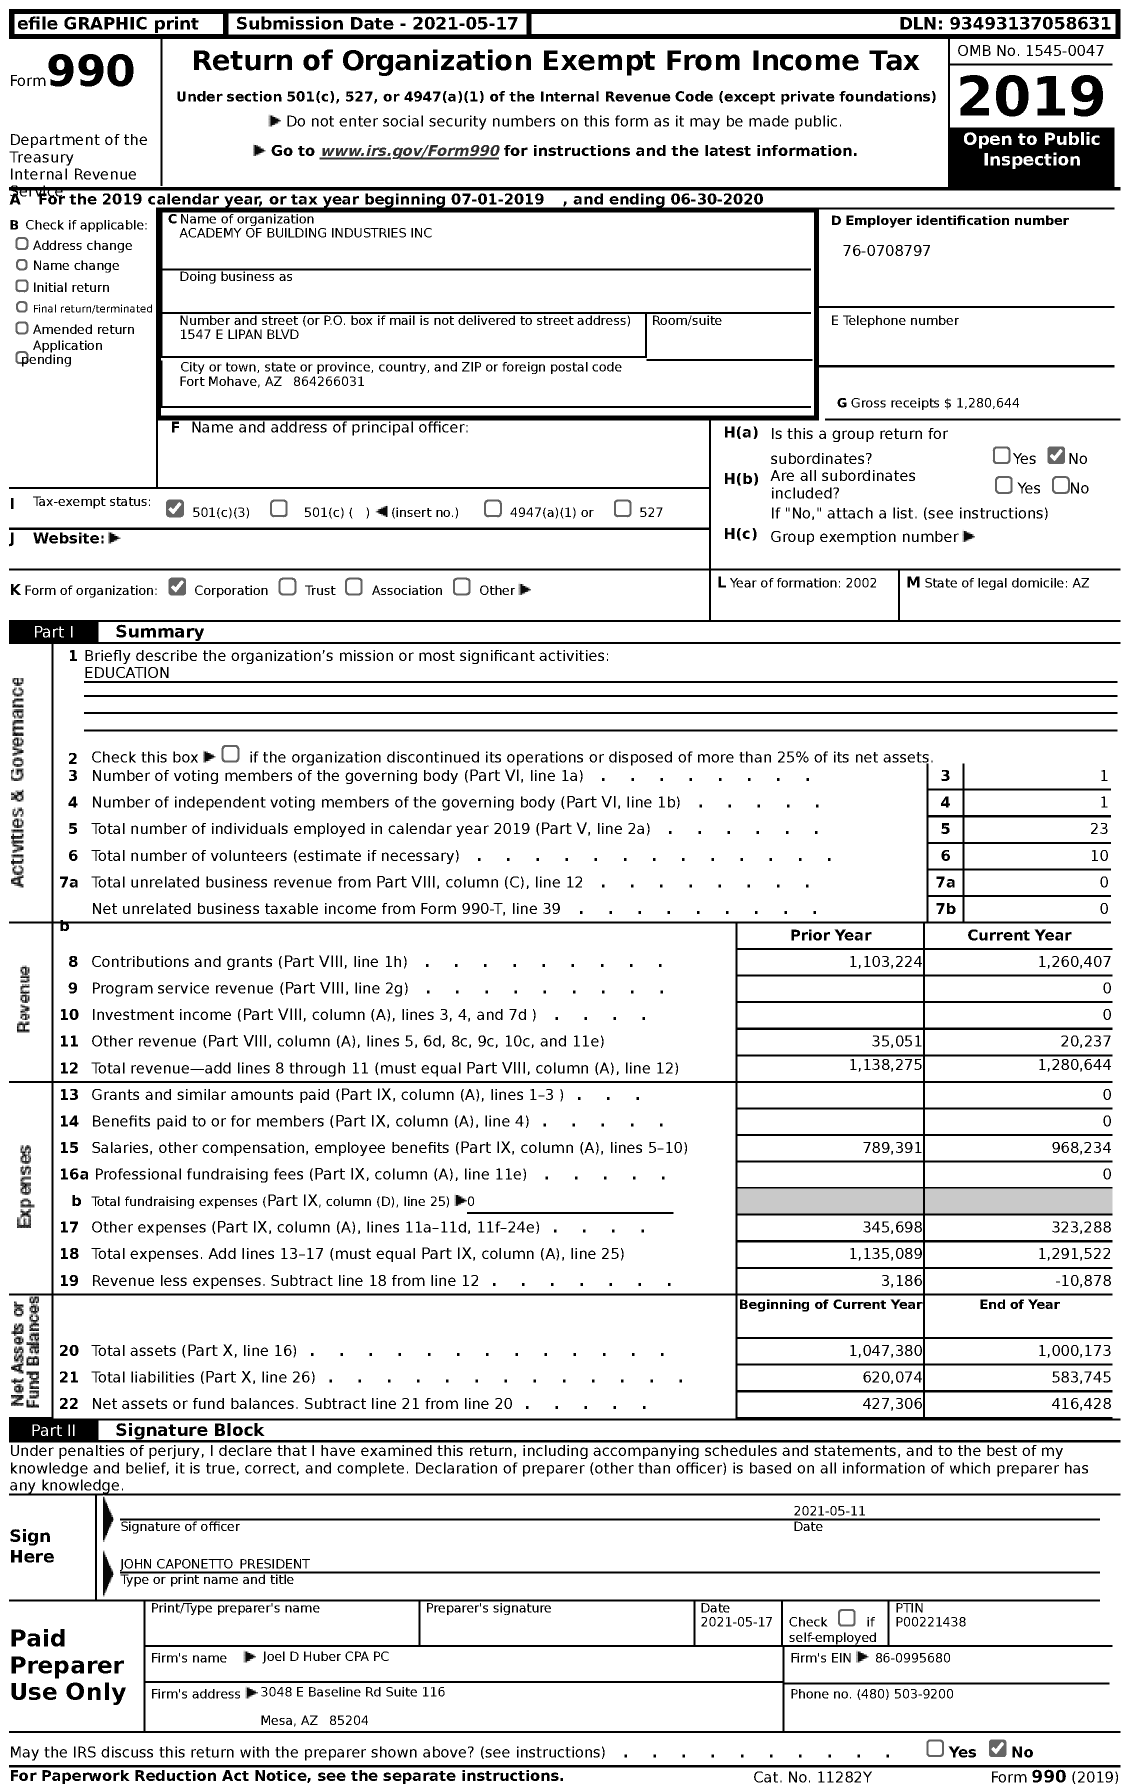 Image of first page of 2019 Form 990 for Academy of Building Industries